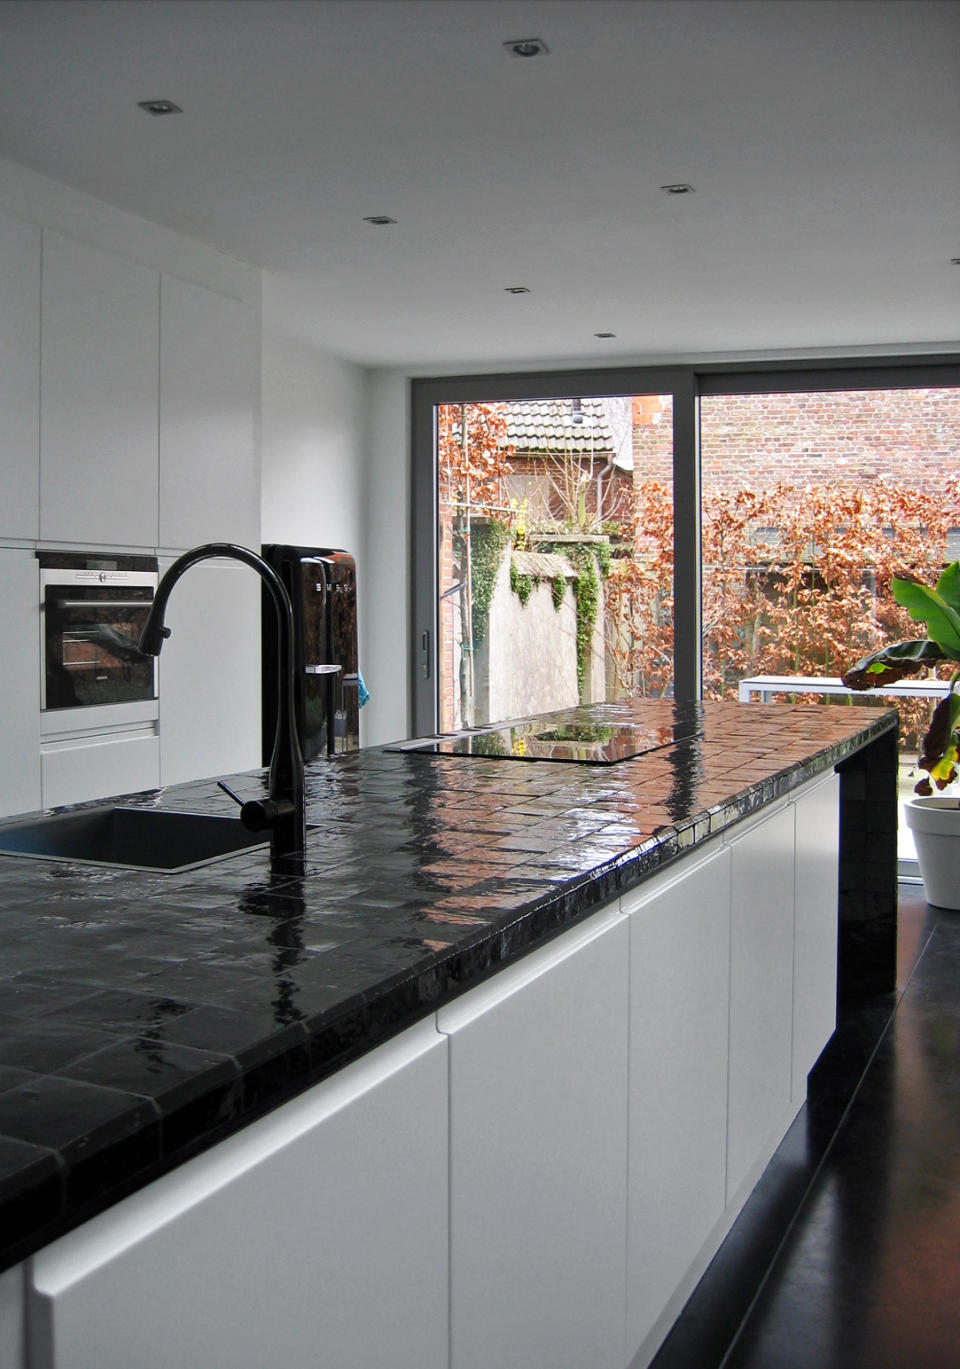 10. Make a statement with a tiled kitchen island